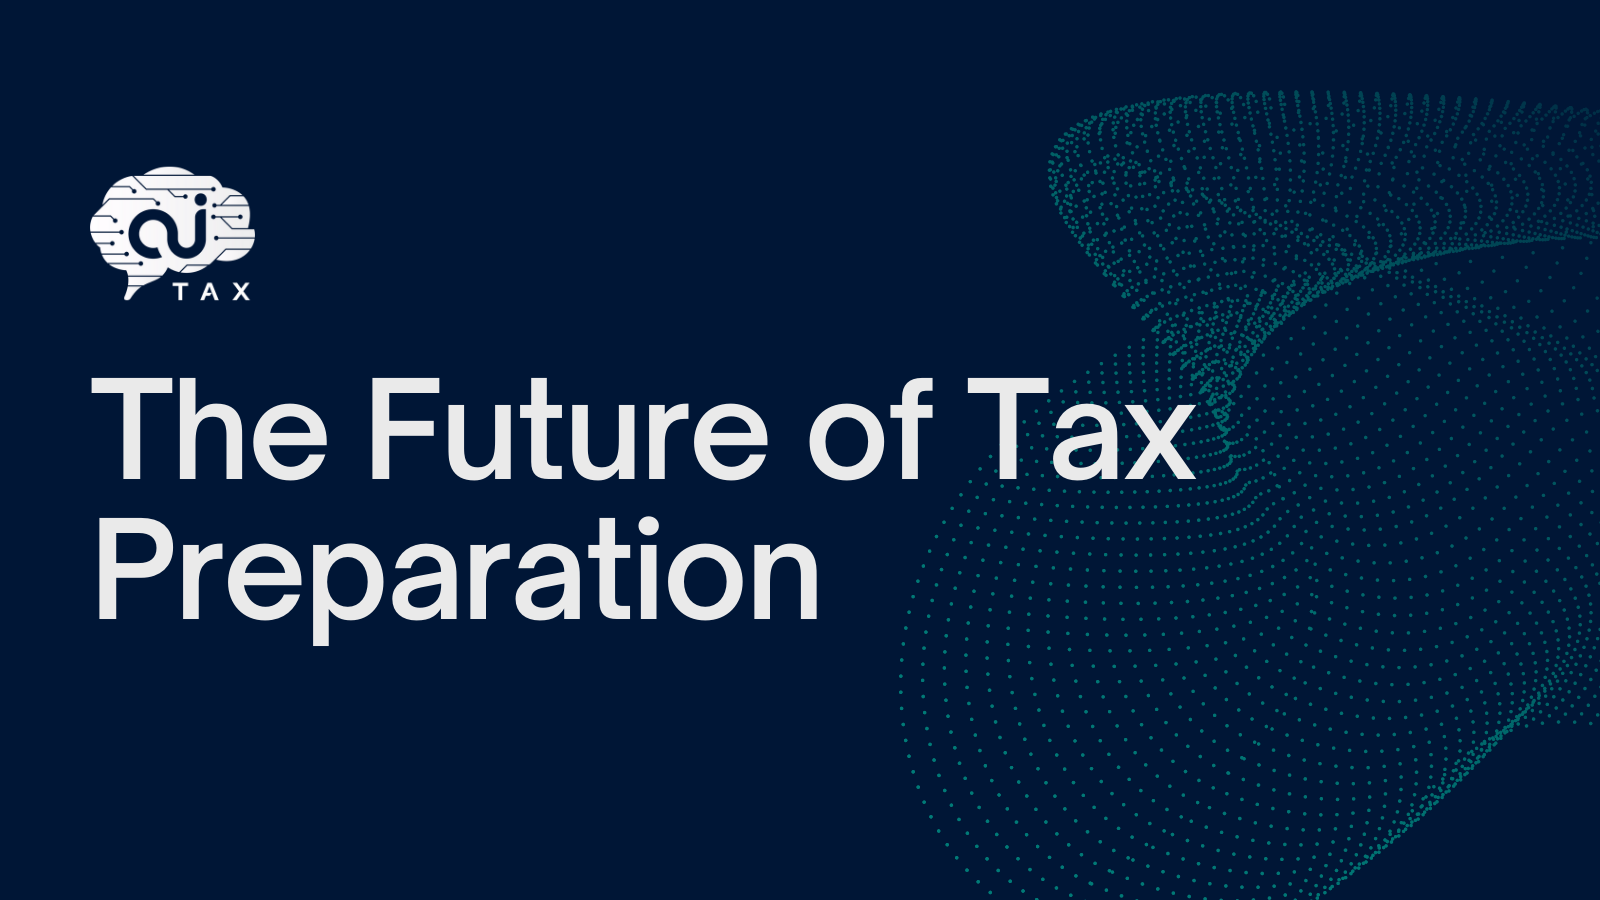 AiTax - AI Technology to Prepare and File Your Taxes